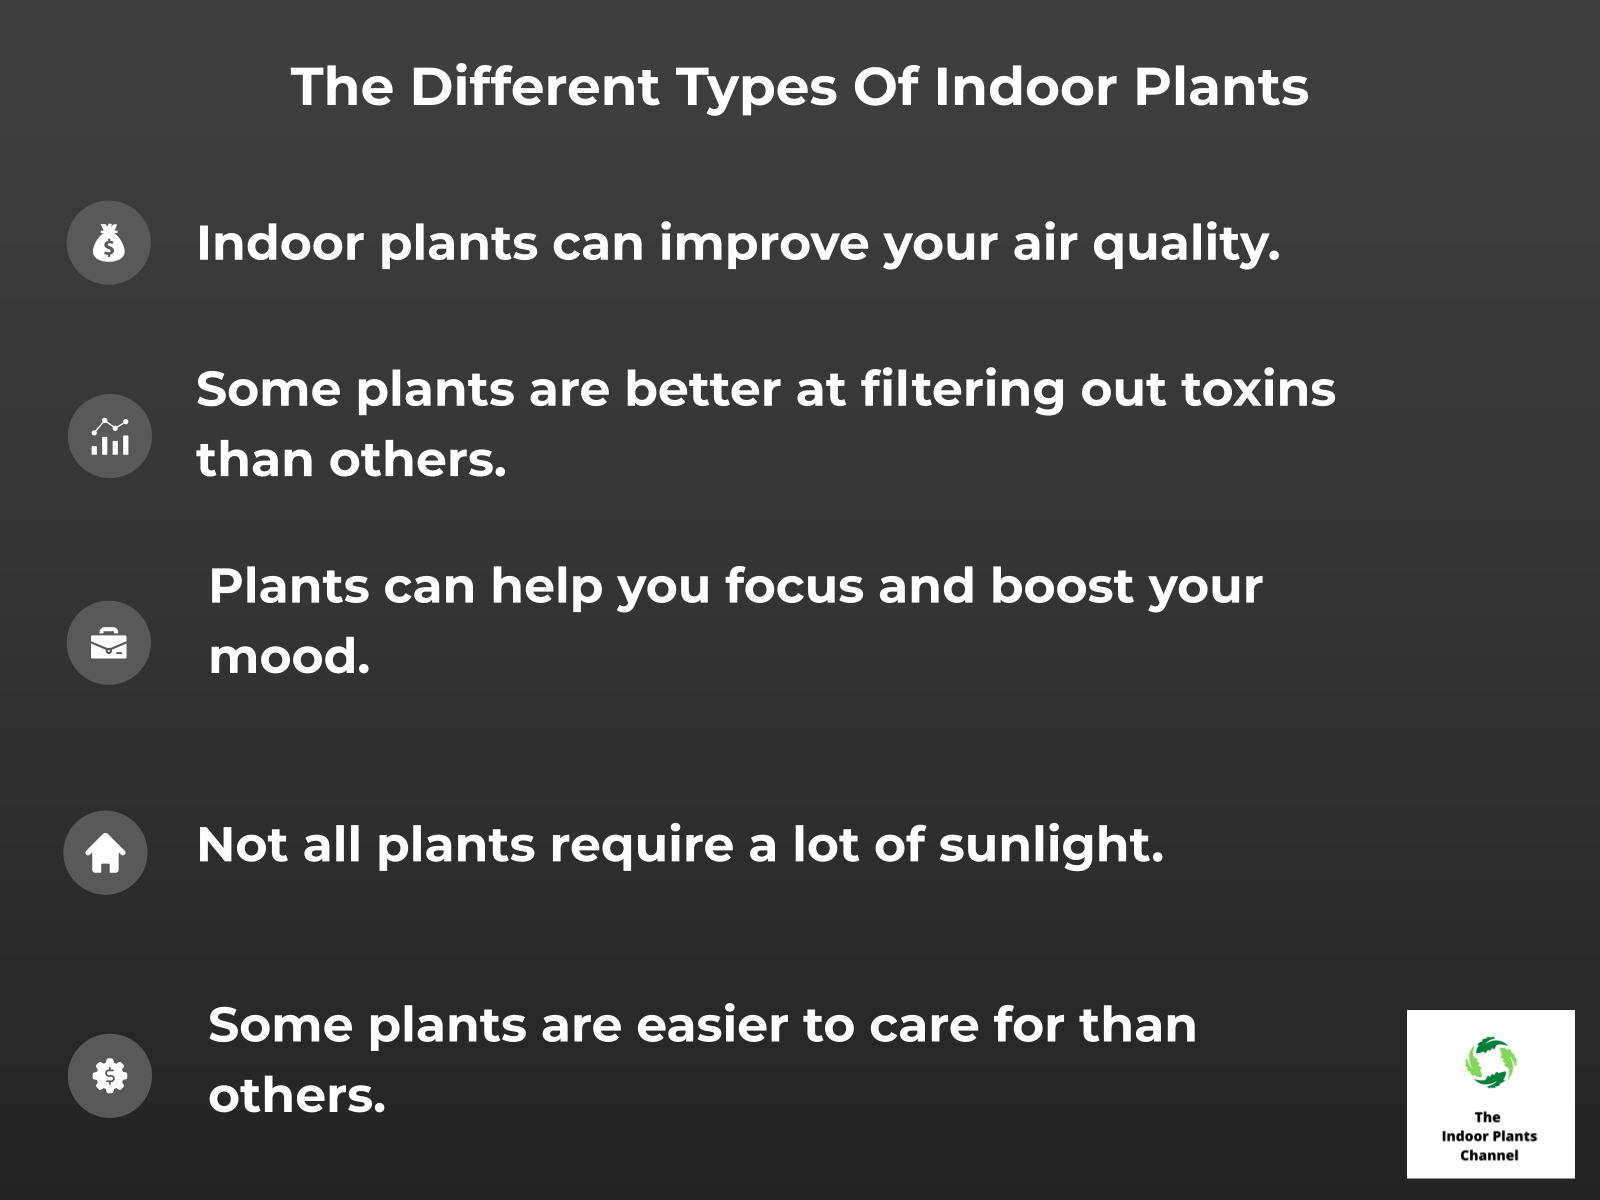 INFOGRAPHIC: The Different Types of Indoor Plants